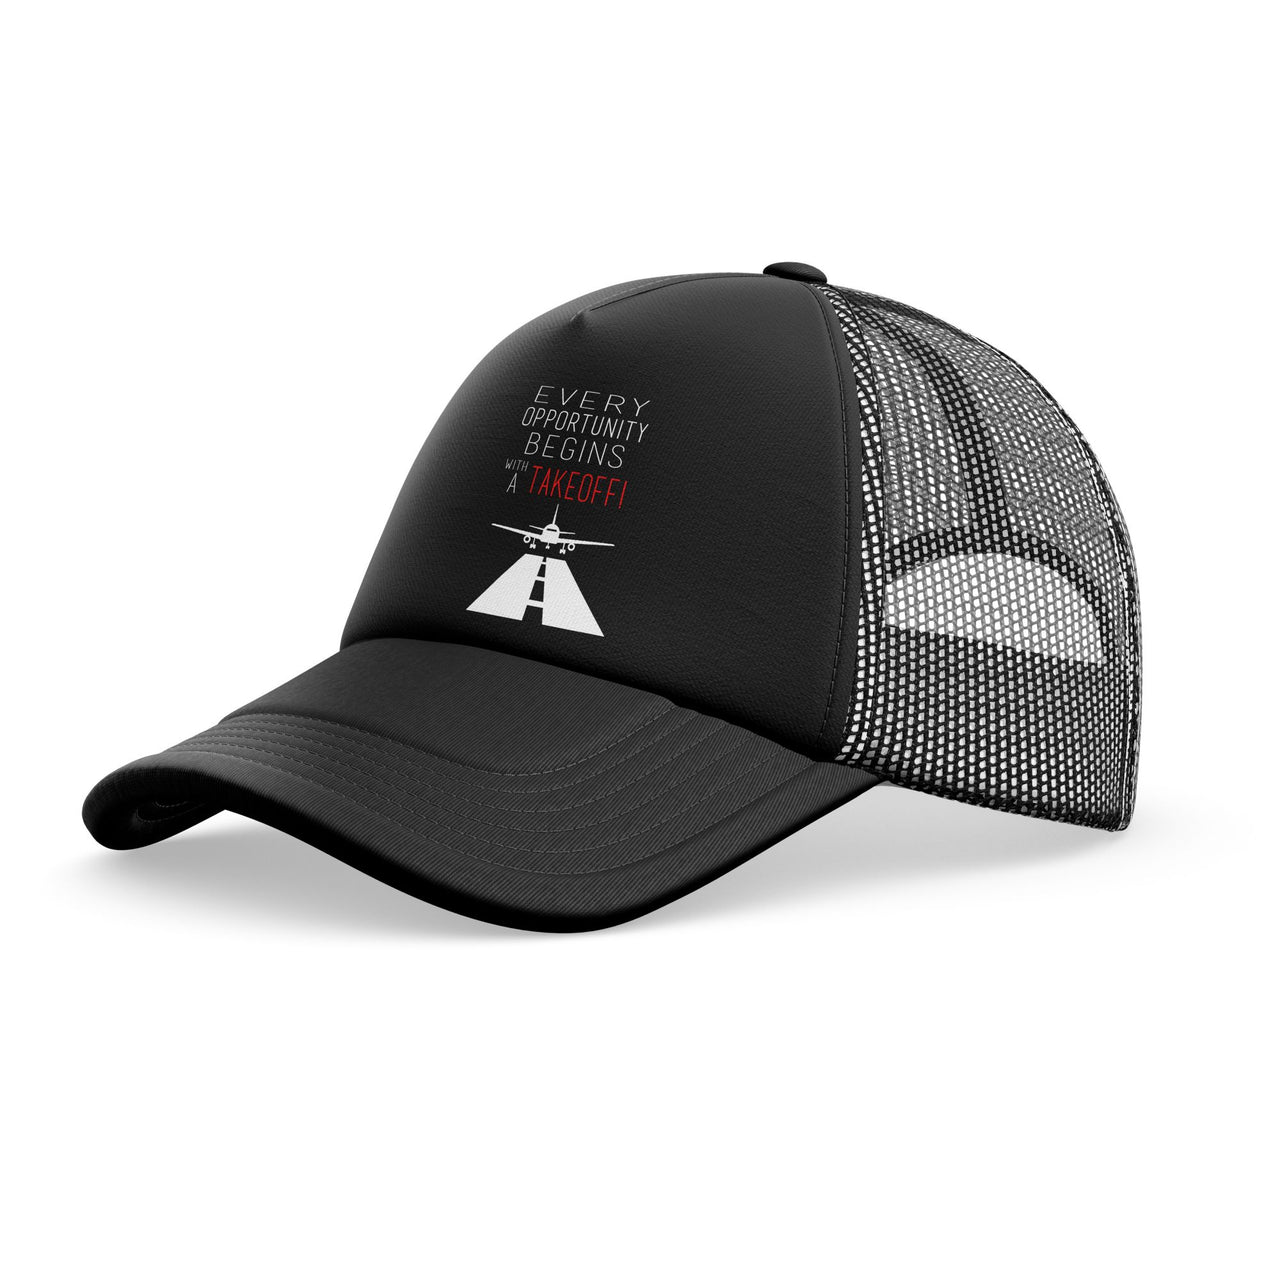 Every Opportunity Designed Trucker Caps & Hats